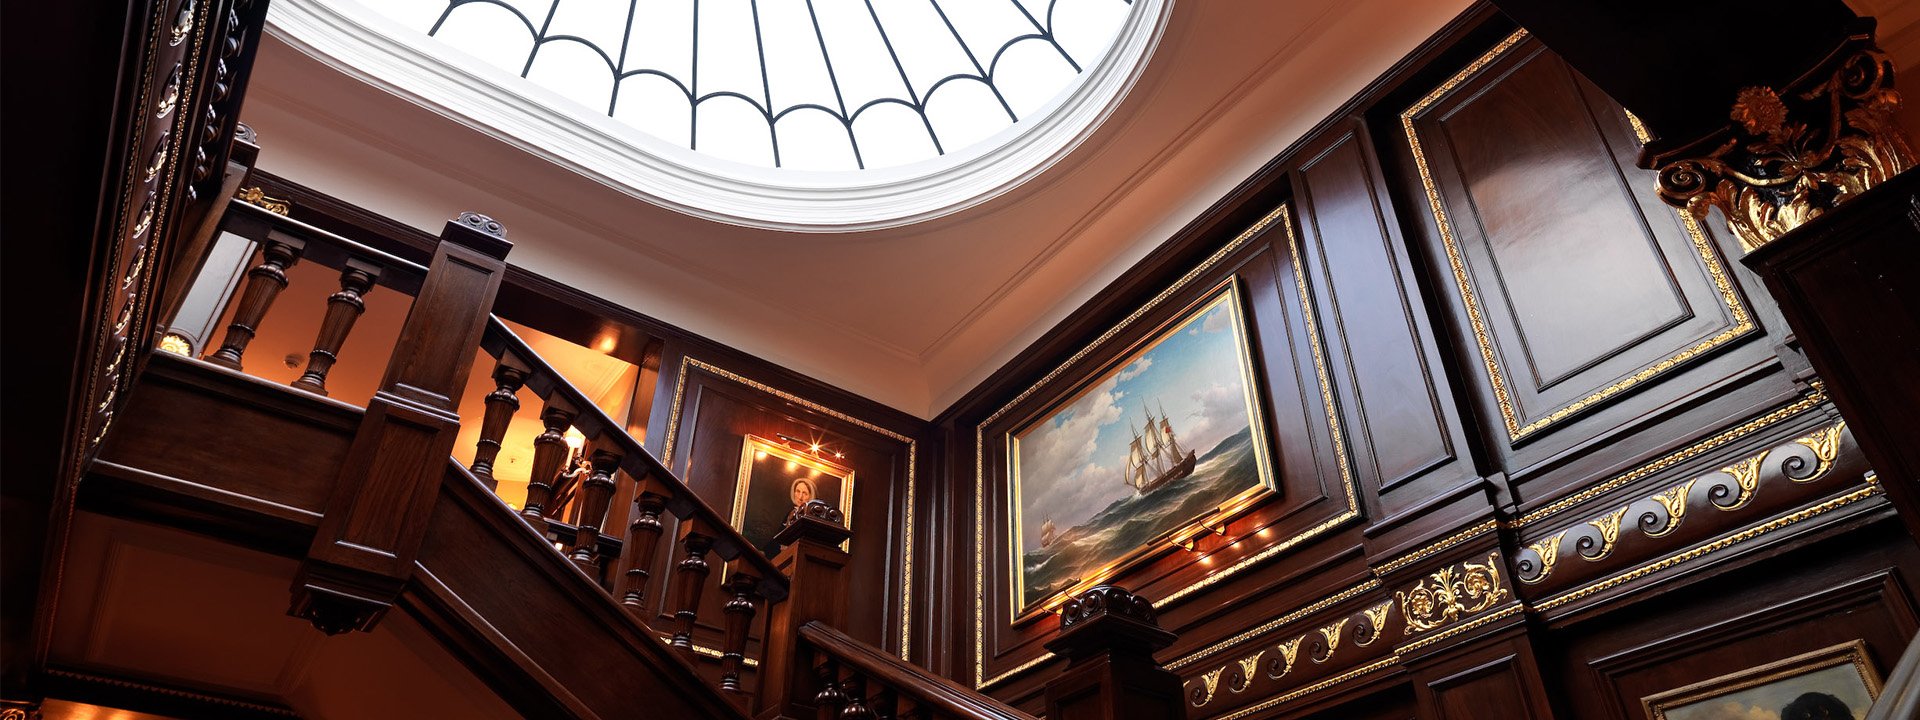 The staircase at The Connaught featuring paintings with golden frames hanged on wooden walls.